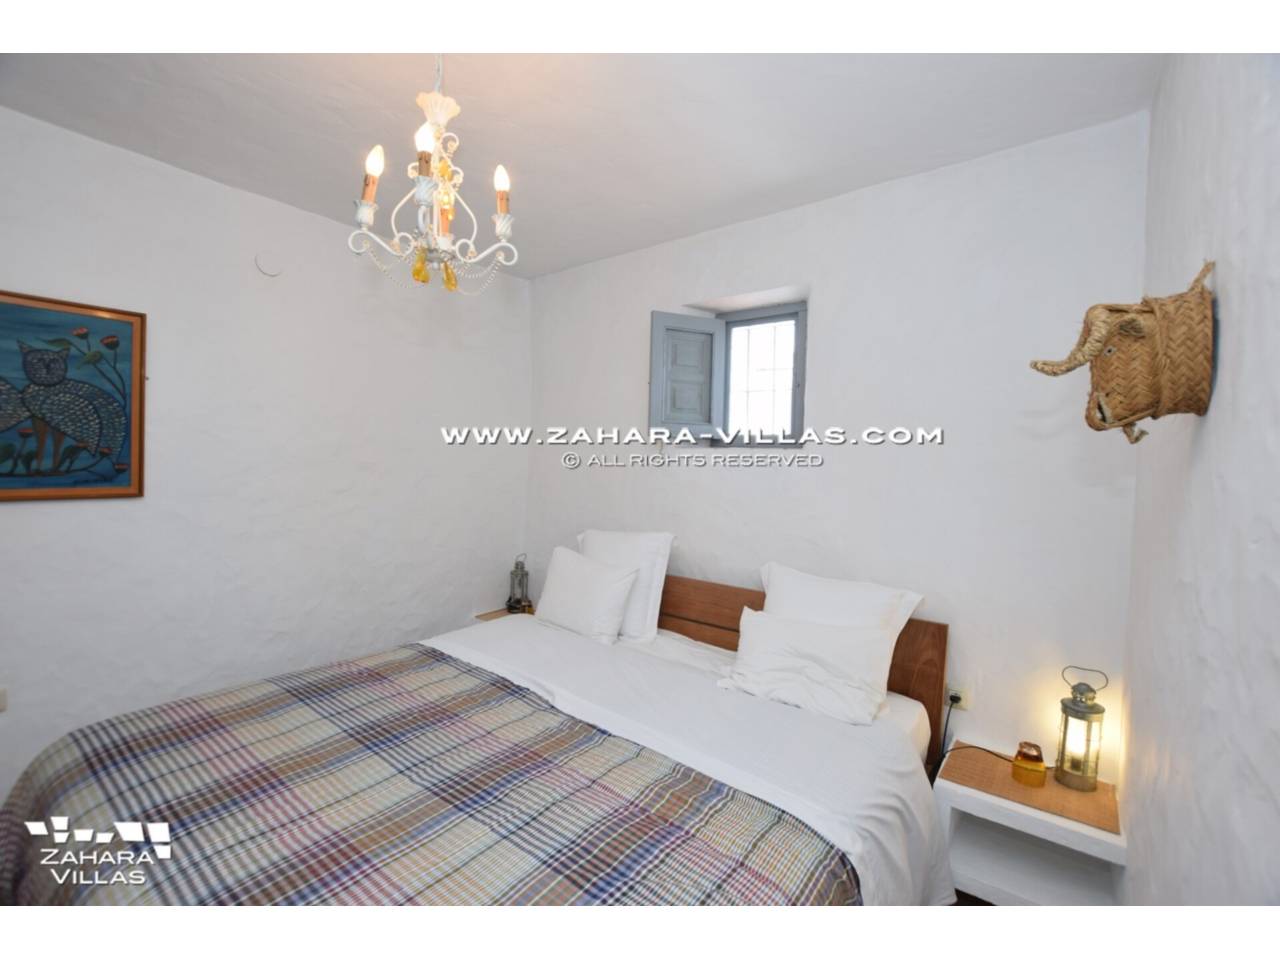 Imagen 45 de Magnificent House with central patio, in the historic center of the town